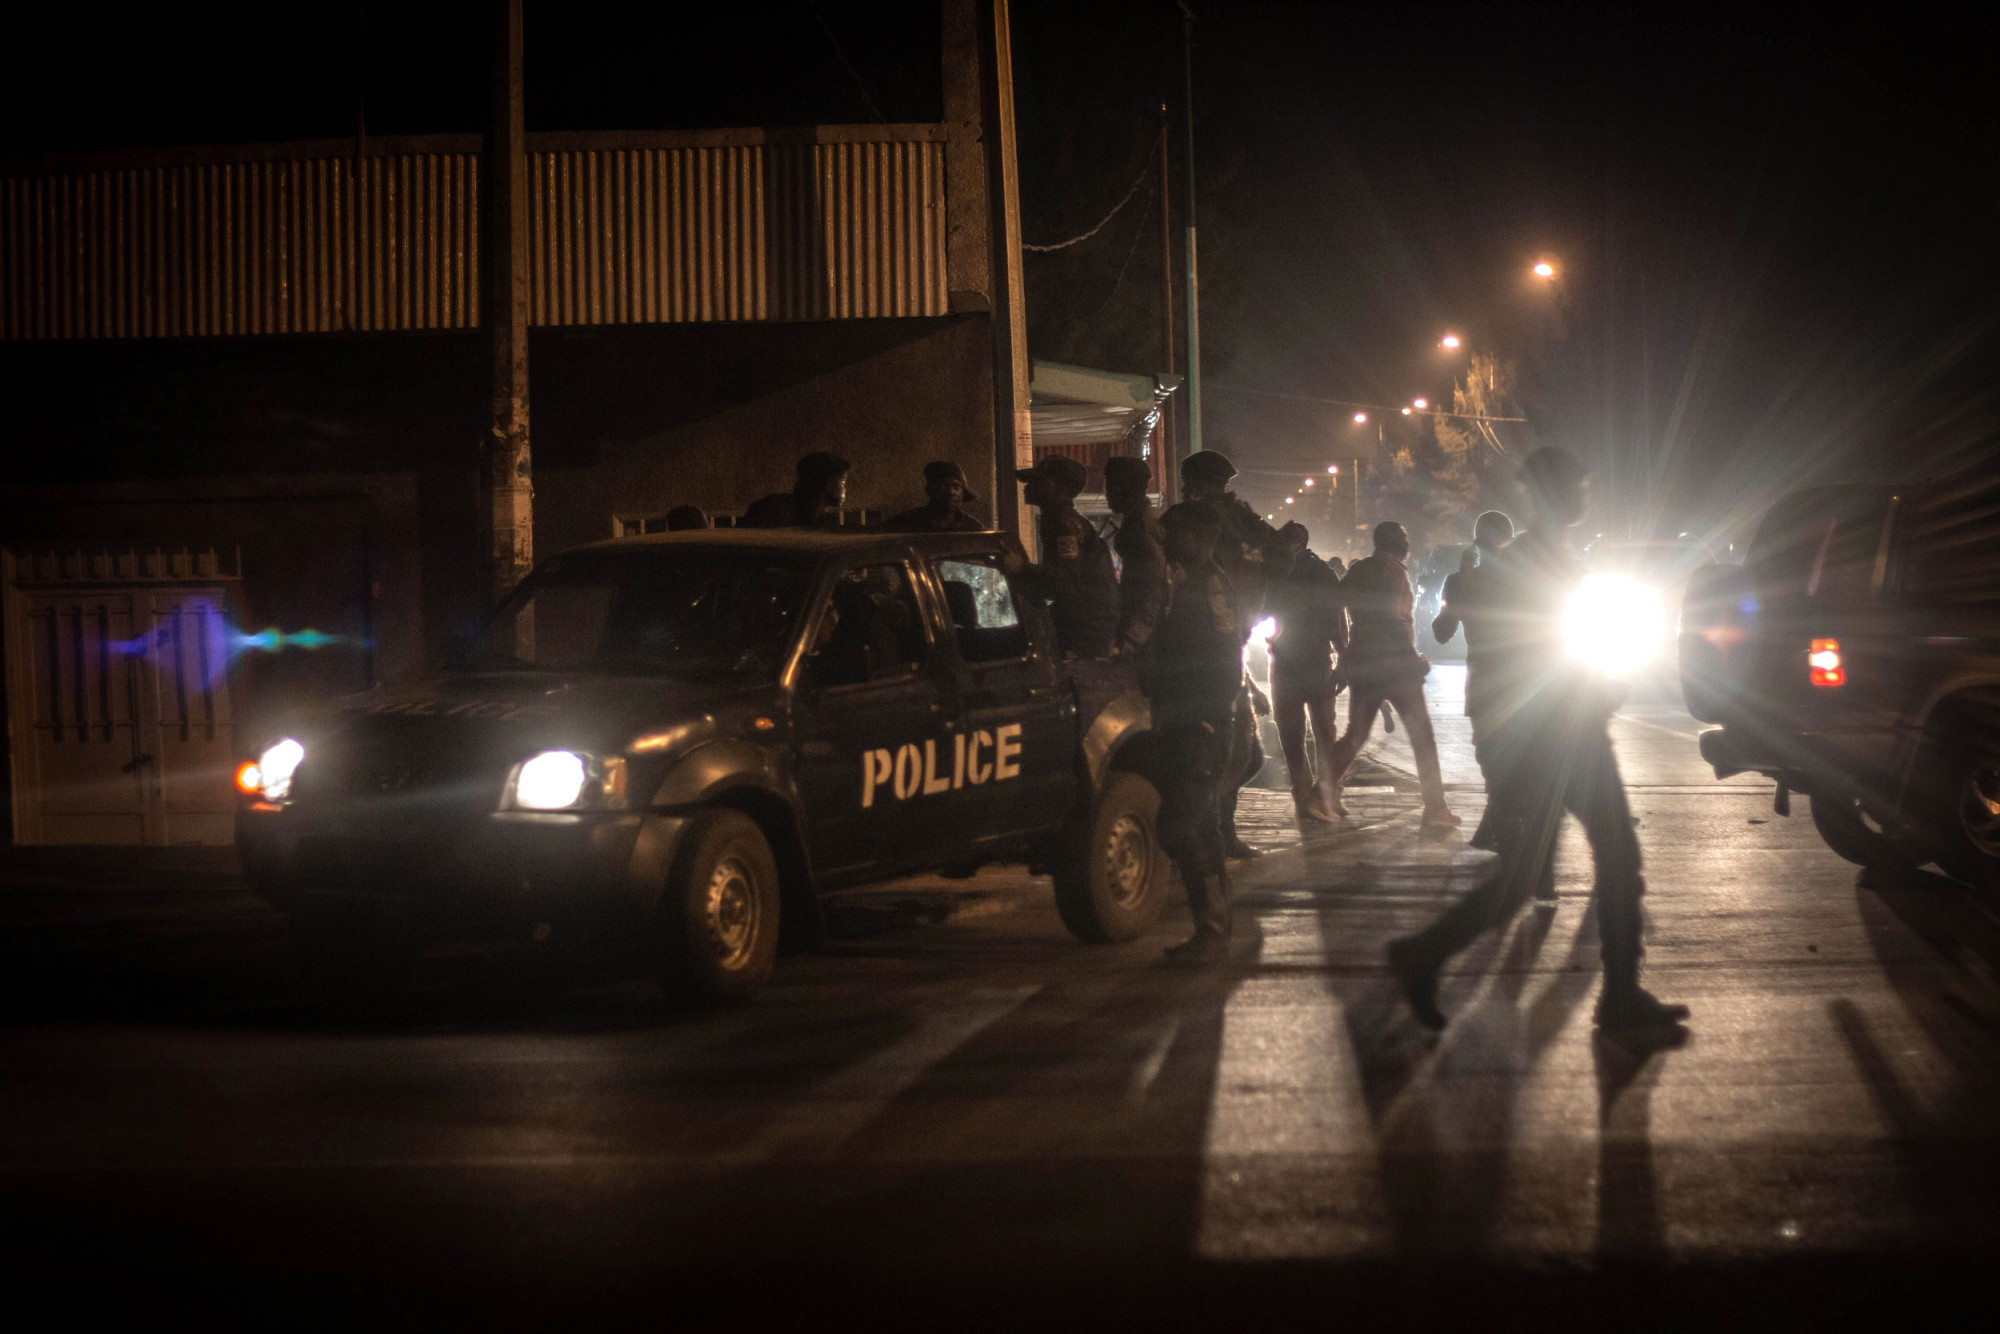 Goma, DRC, May 20th, 2020. Police set up a roadblock to enforce a new curfew imposed to limit the spread of coronavirus in the eastern Congolese city of Goma on Wednesday. © Guerchom Ndebo for Fondation Carmignac